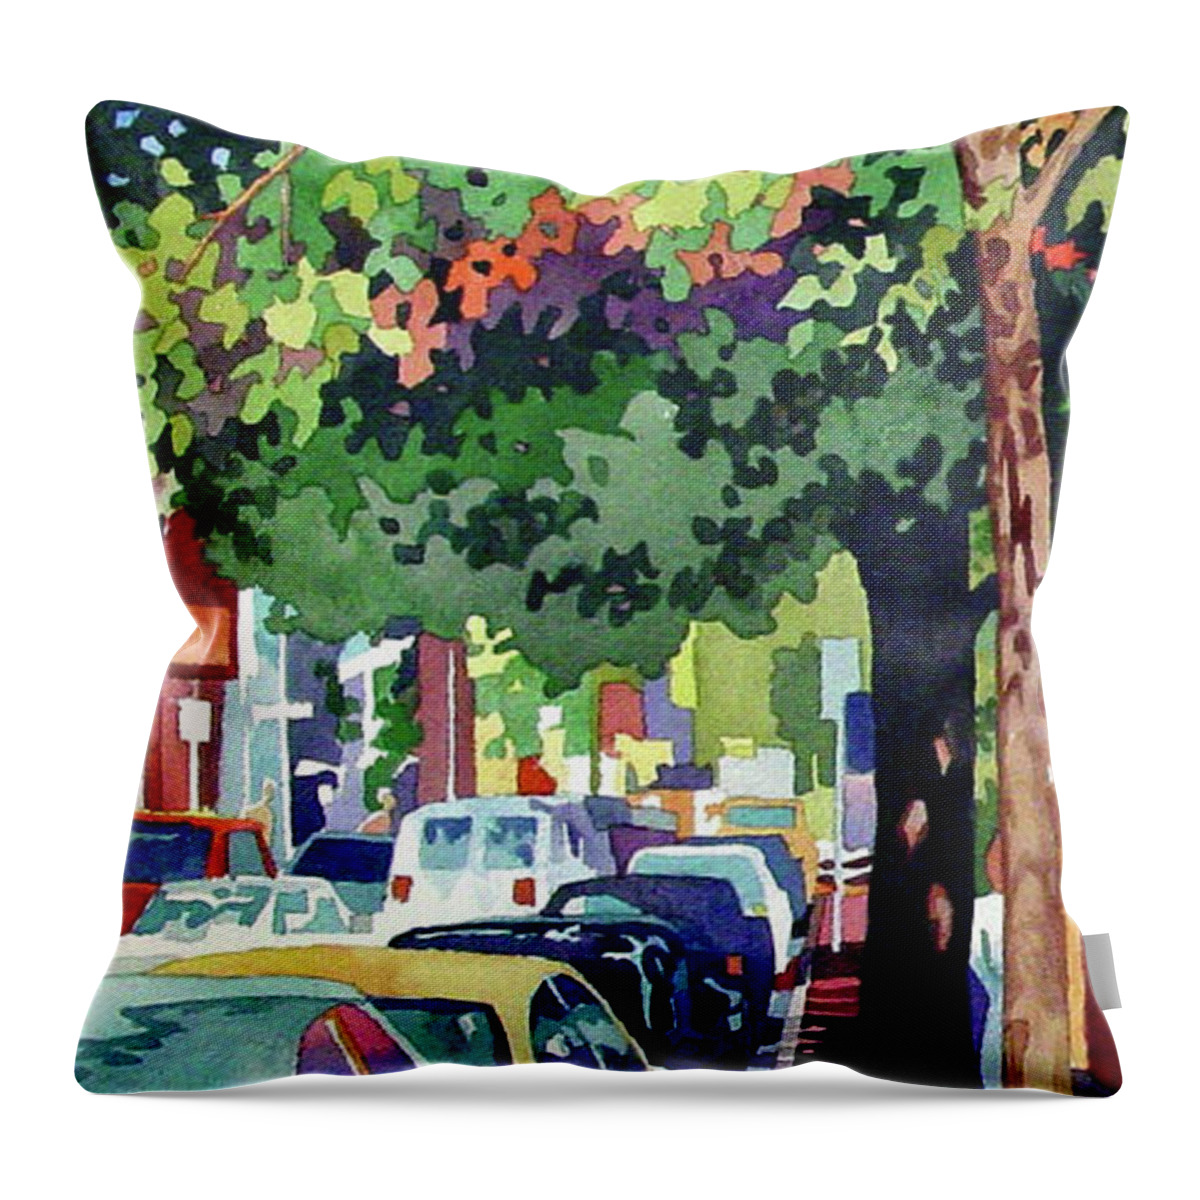 City Throw Pillow featuring the painting Urban Jungle by Mick Williams